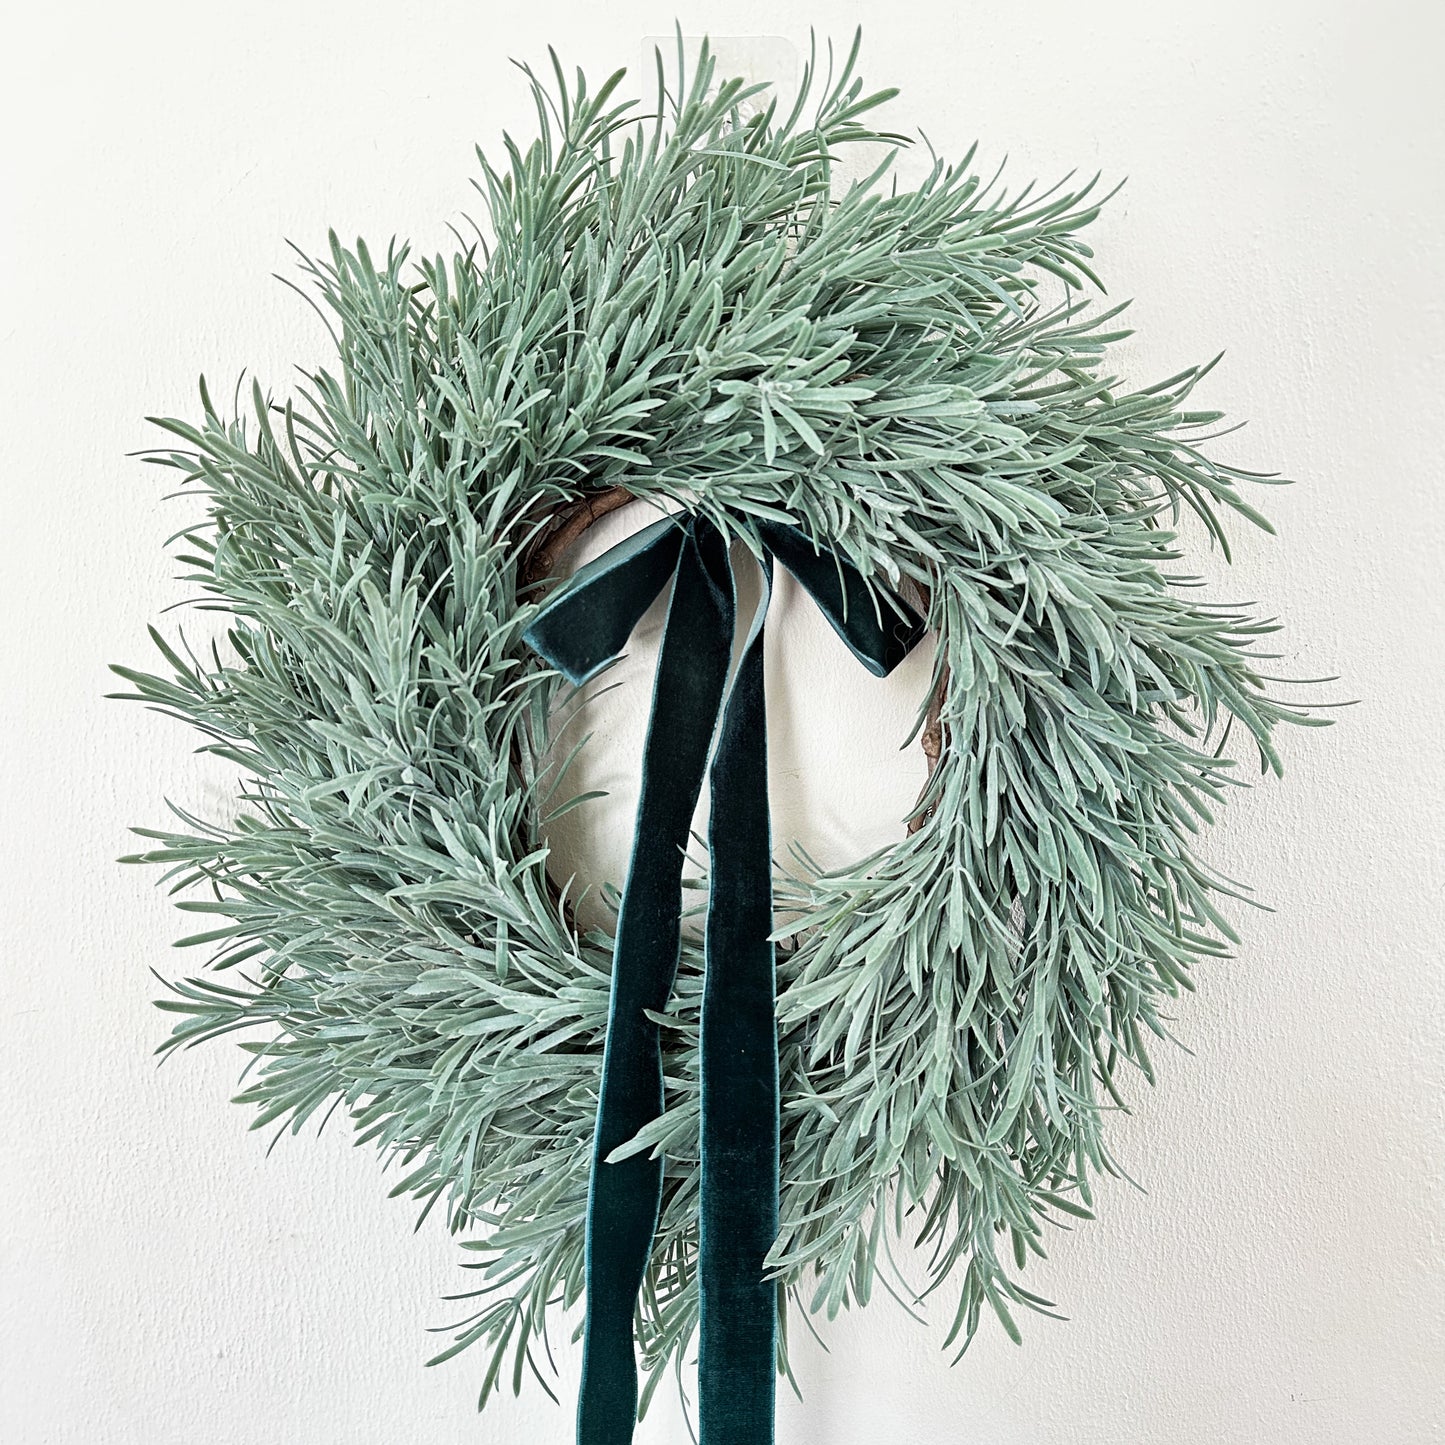 Everyday Rosemary Greenery Wreath with Teal Green Velvet Ribbon, Kitchen Cabinet Wreath, Christmas Mini Wreath, Small Faux Herb Wreath,